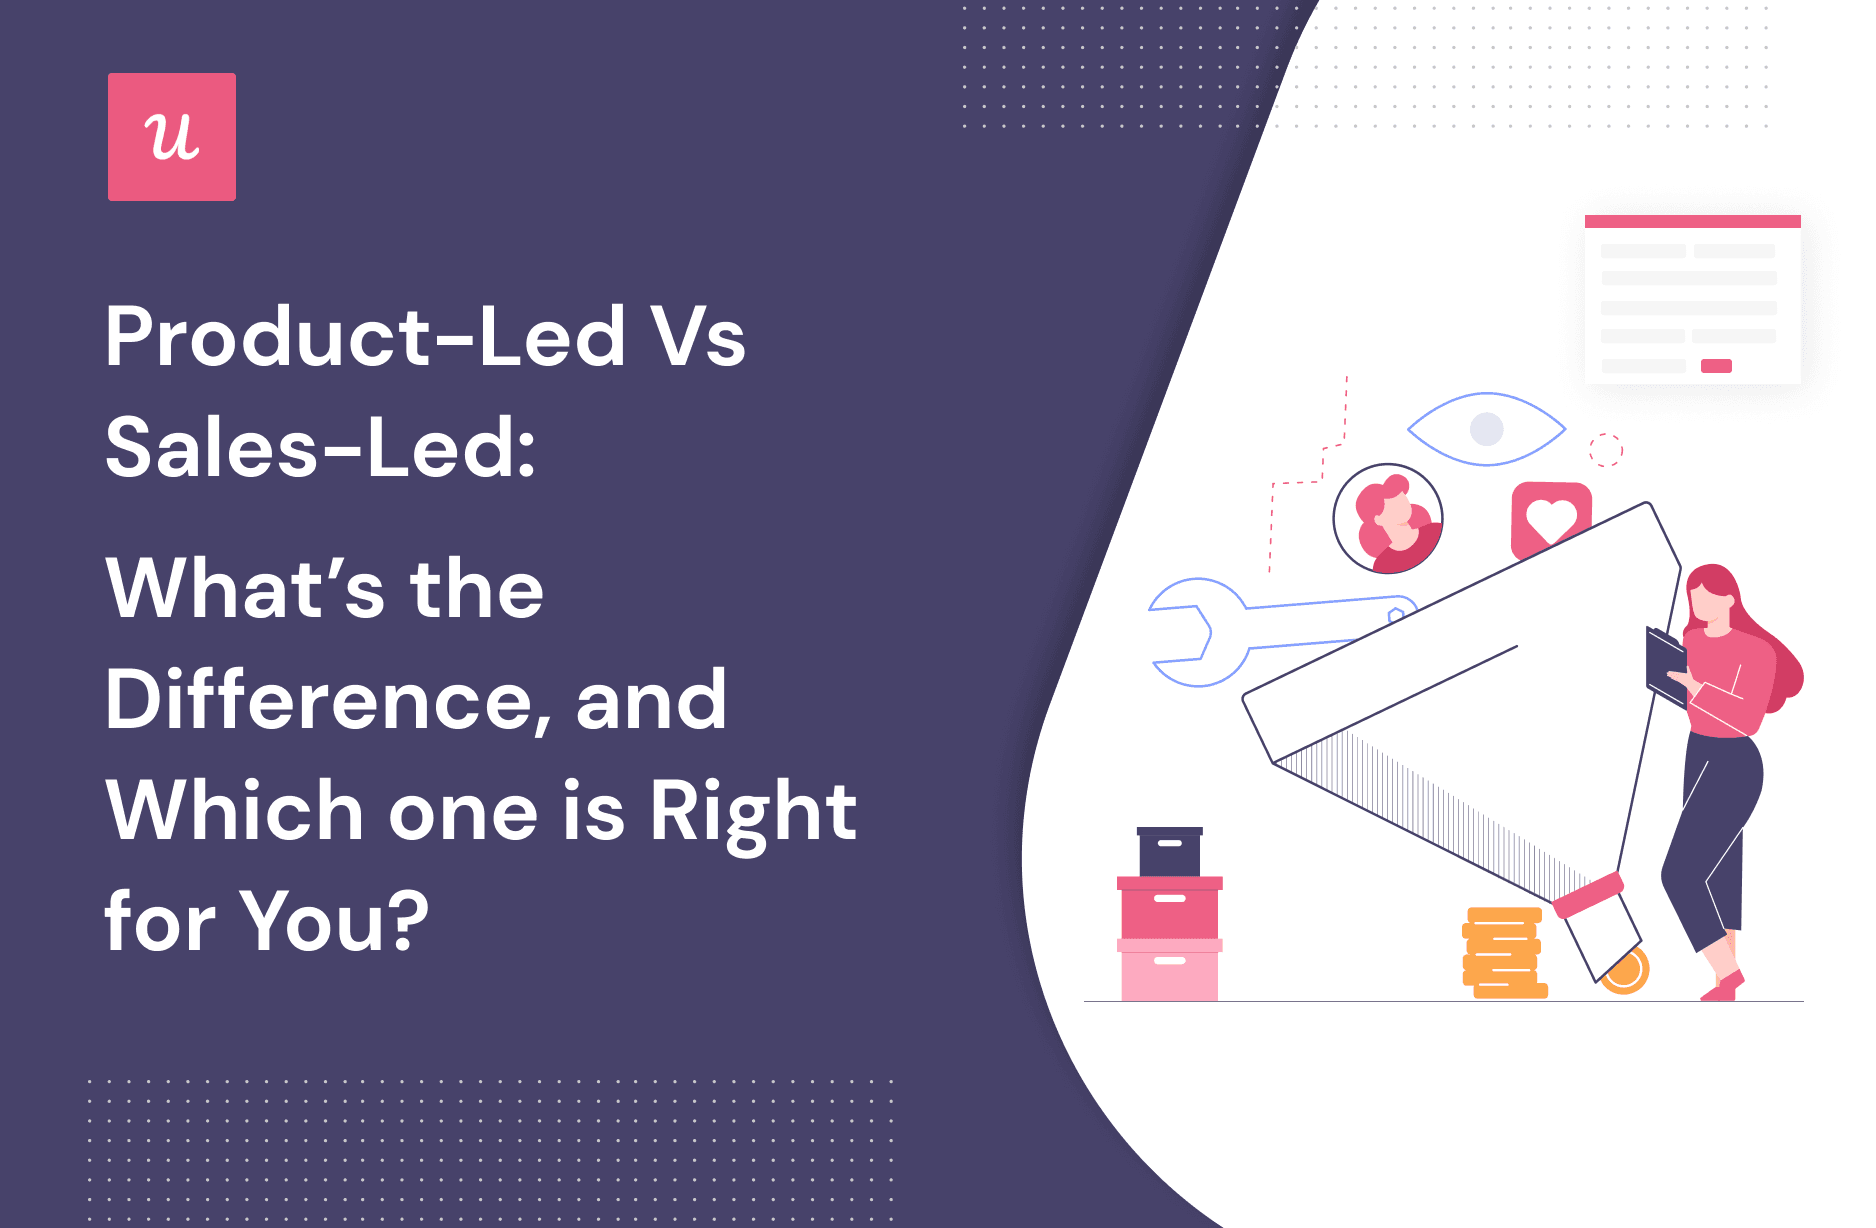 Product-Led vs Sales-Led: What’s the Difference, and Which One Is Right for You?